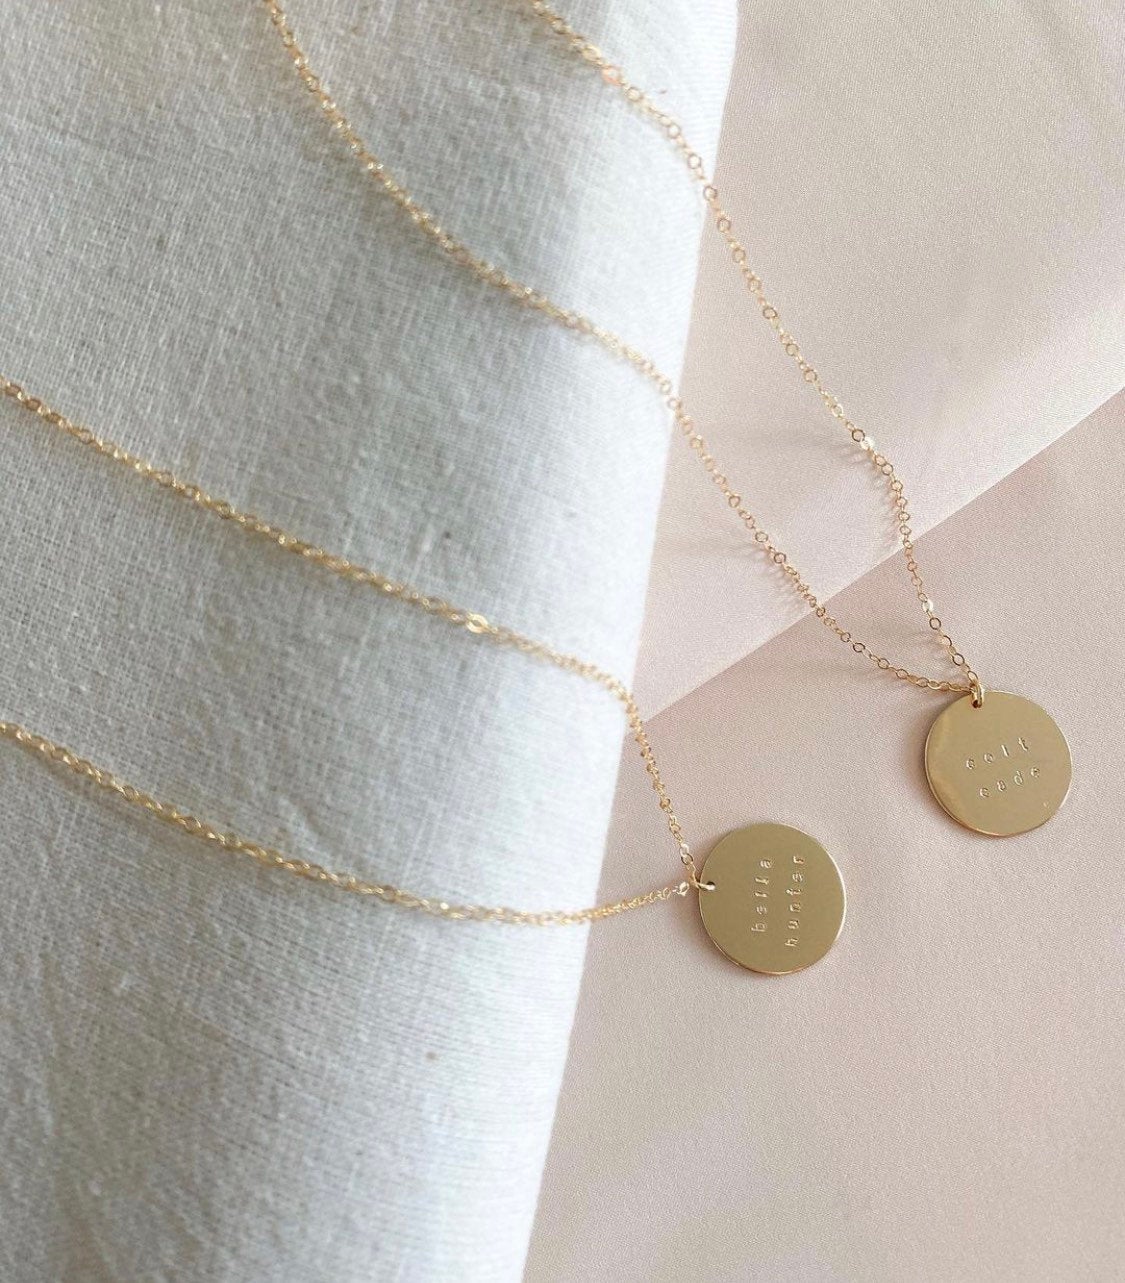 Custom stamped circle pendant necklace - 14/20 Gold fill - tarnish free - small font - made to last - hand stamped - personalized gift